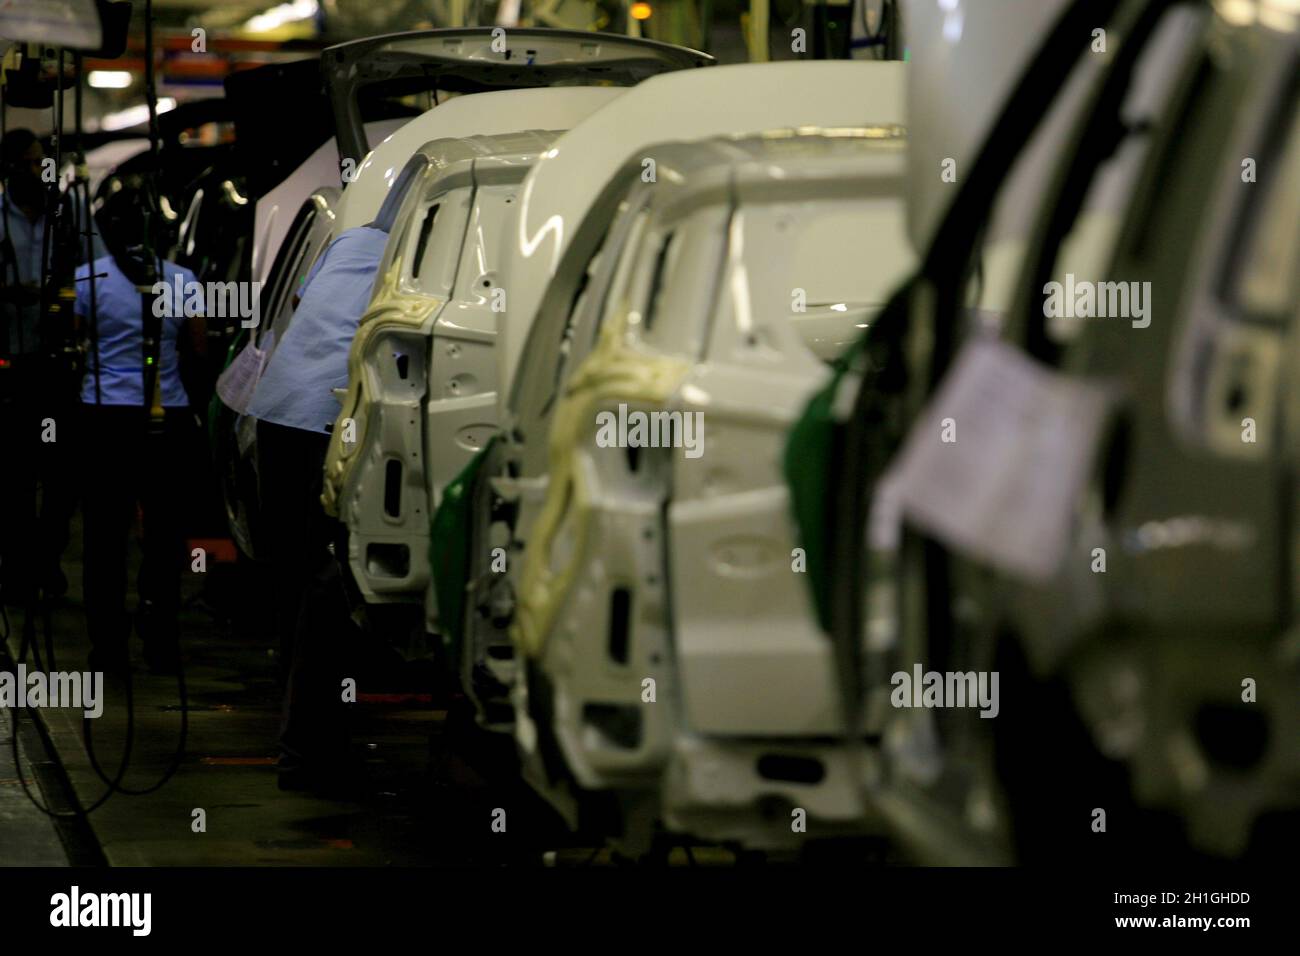 camacari, bahia / brazil - december 12, 2013: workers are seen on the assembly line at the Ford factory in the Industrial Pole of the city of Camacari Stock Photo